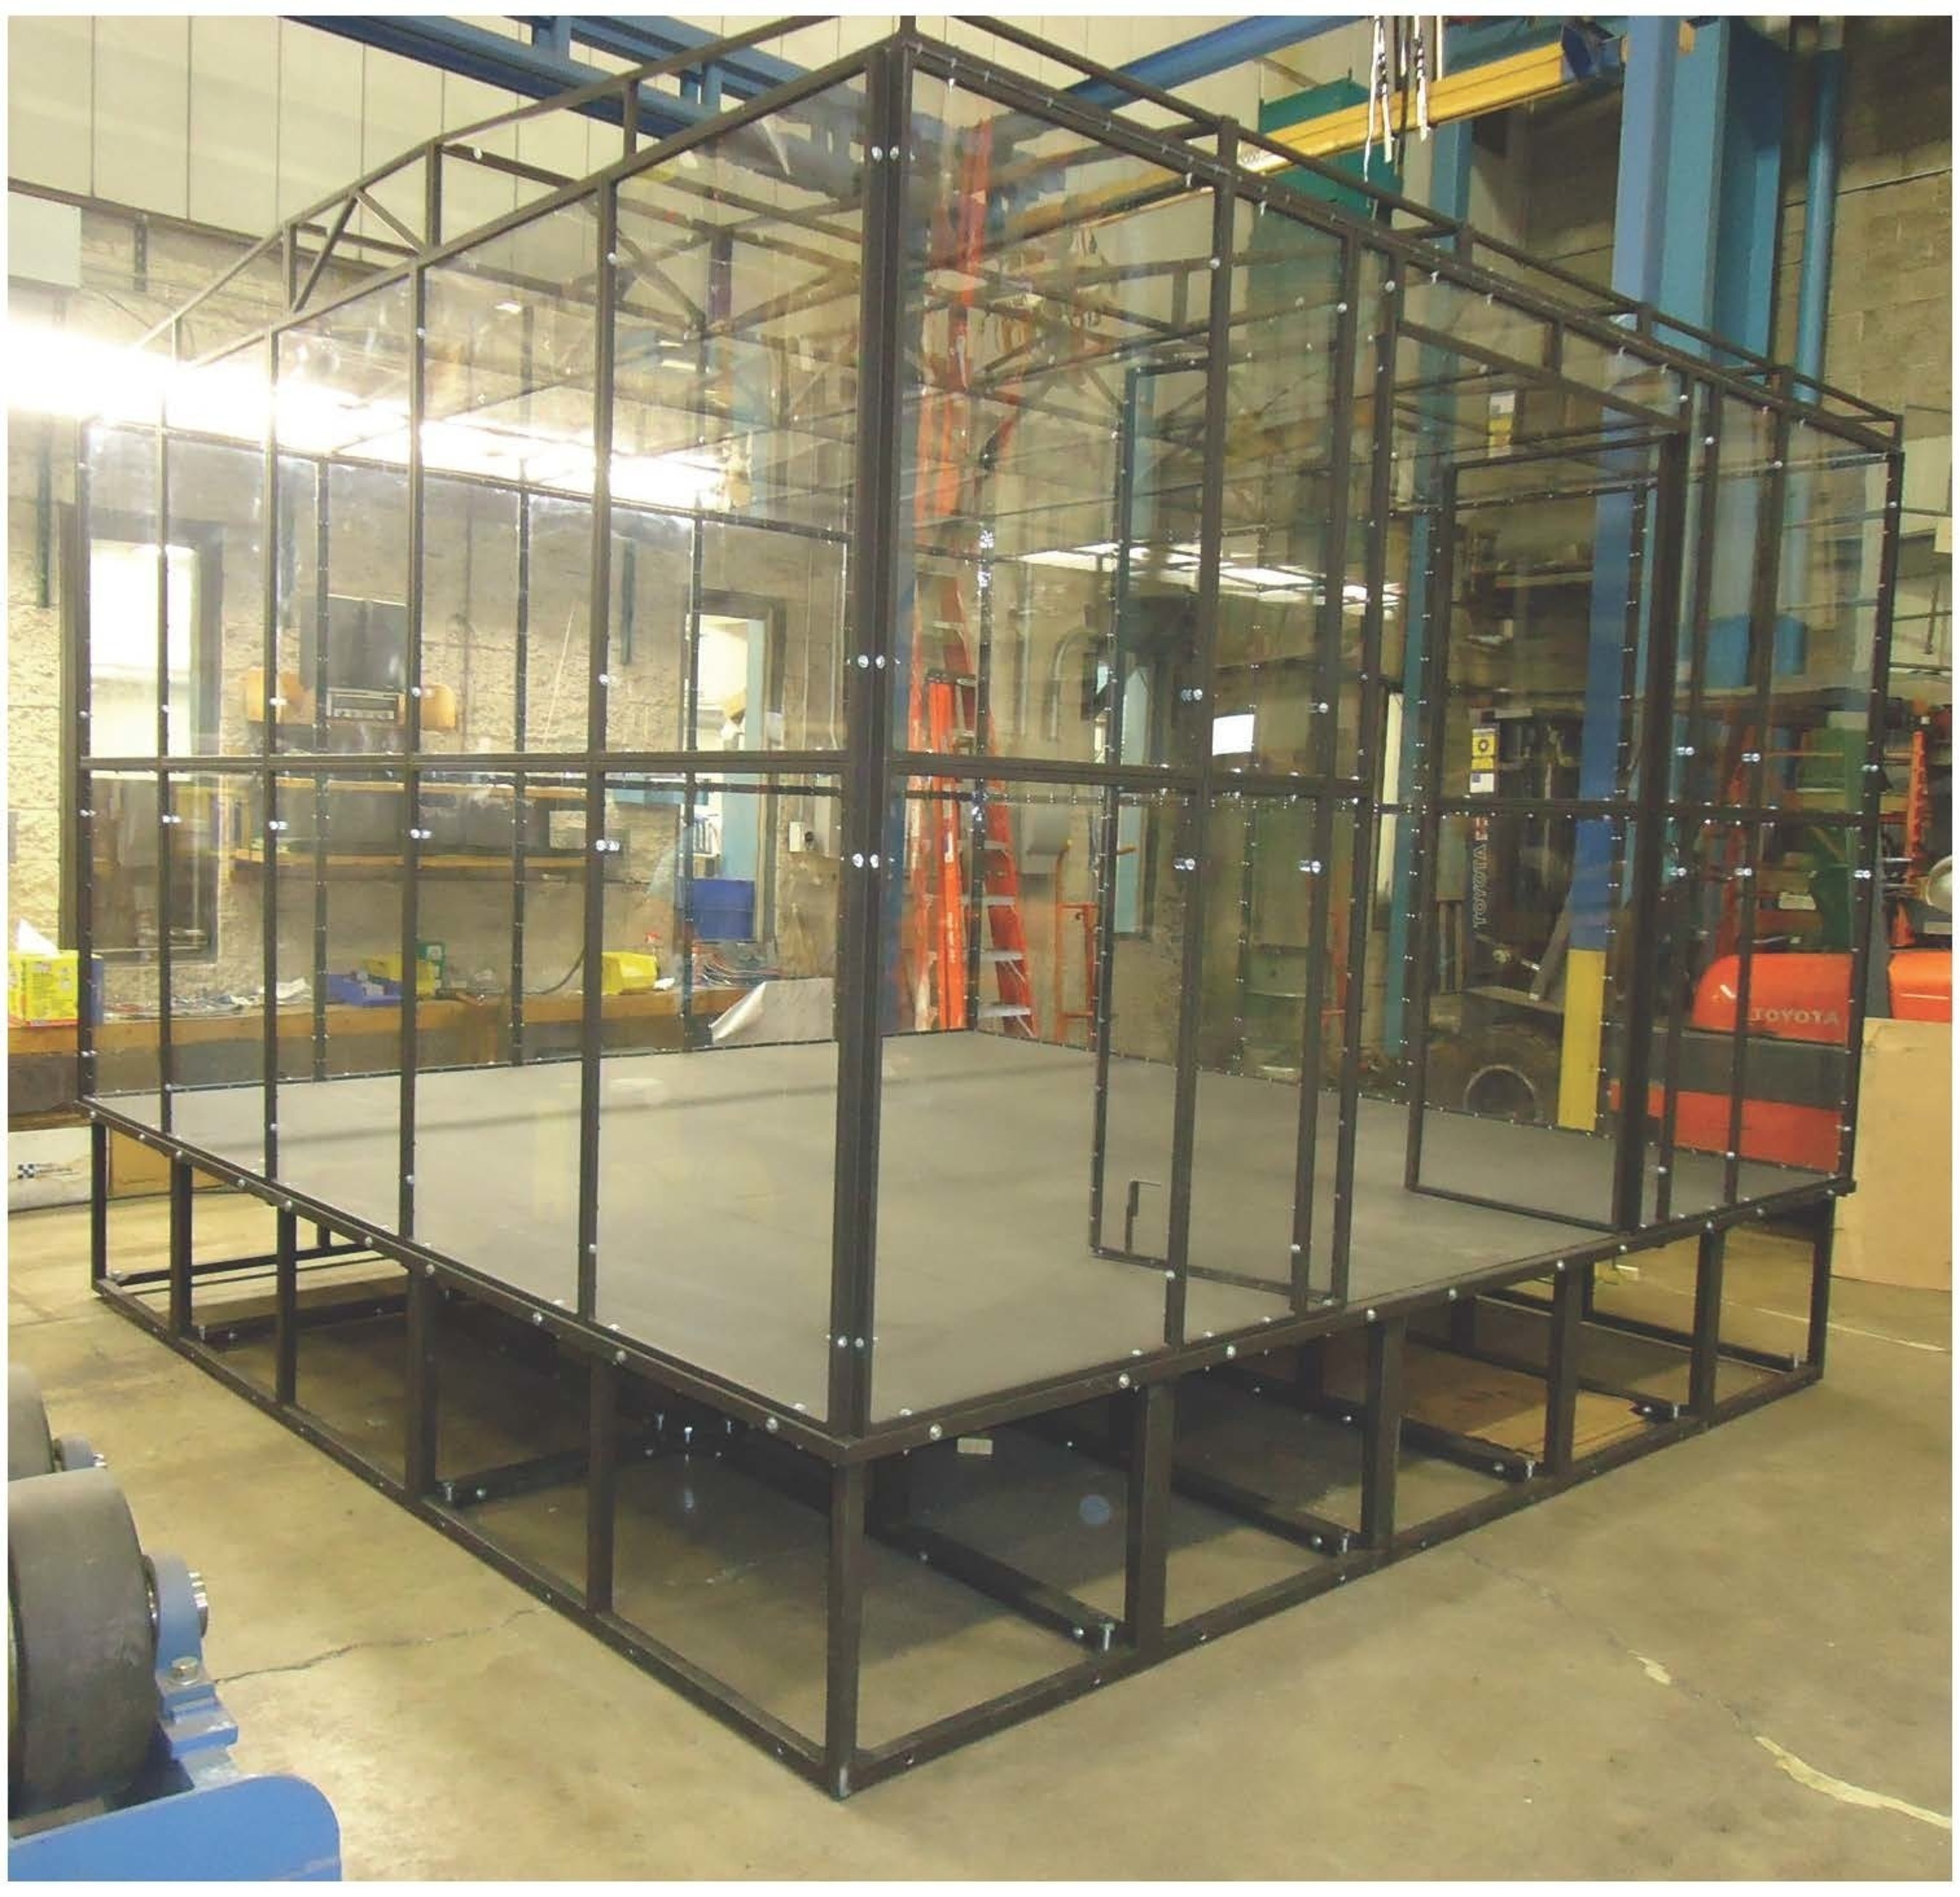 Growing interest in the Southwestern Pennsylvania BotsIQ program necessitated a second arena to use for the bots competitions. The new arena is approximately 12.5 feet square, features a steel floor and is encased in half-inch-thick Makrolon(R) 15 polycarbonate sheet connected with steel supports. (PRNewsFoto/Bayer MaterialScience LLC)